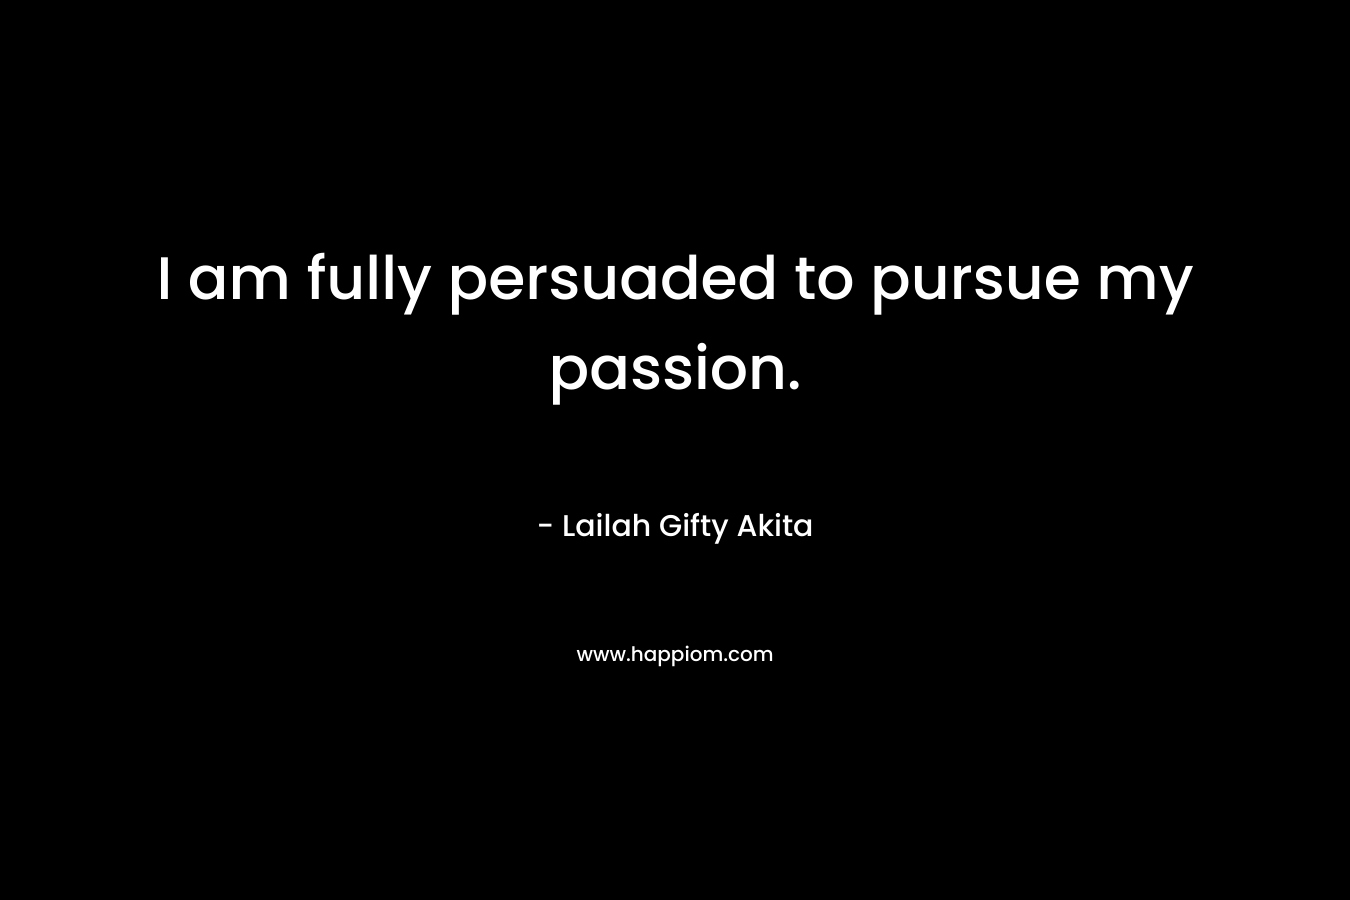 I am fully persuaded to pursue my passion. – Lailah Gifty Akita